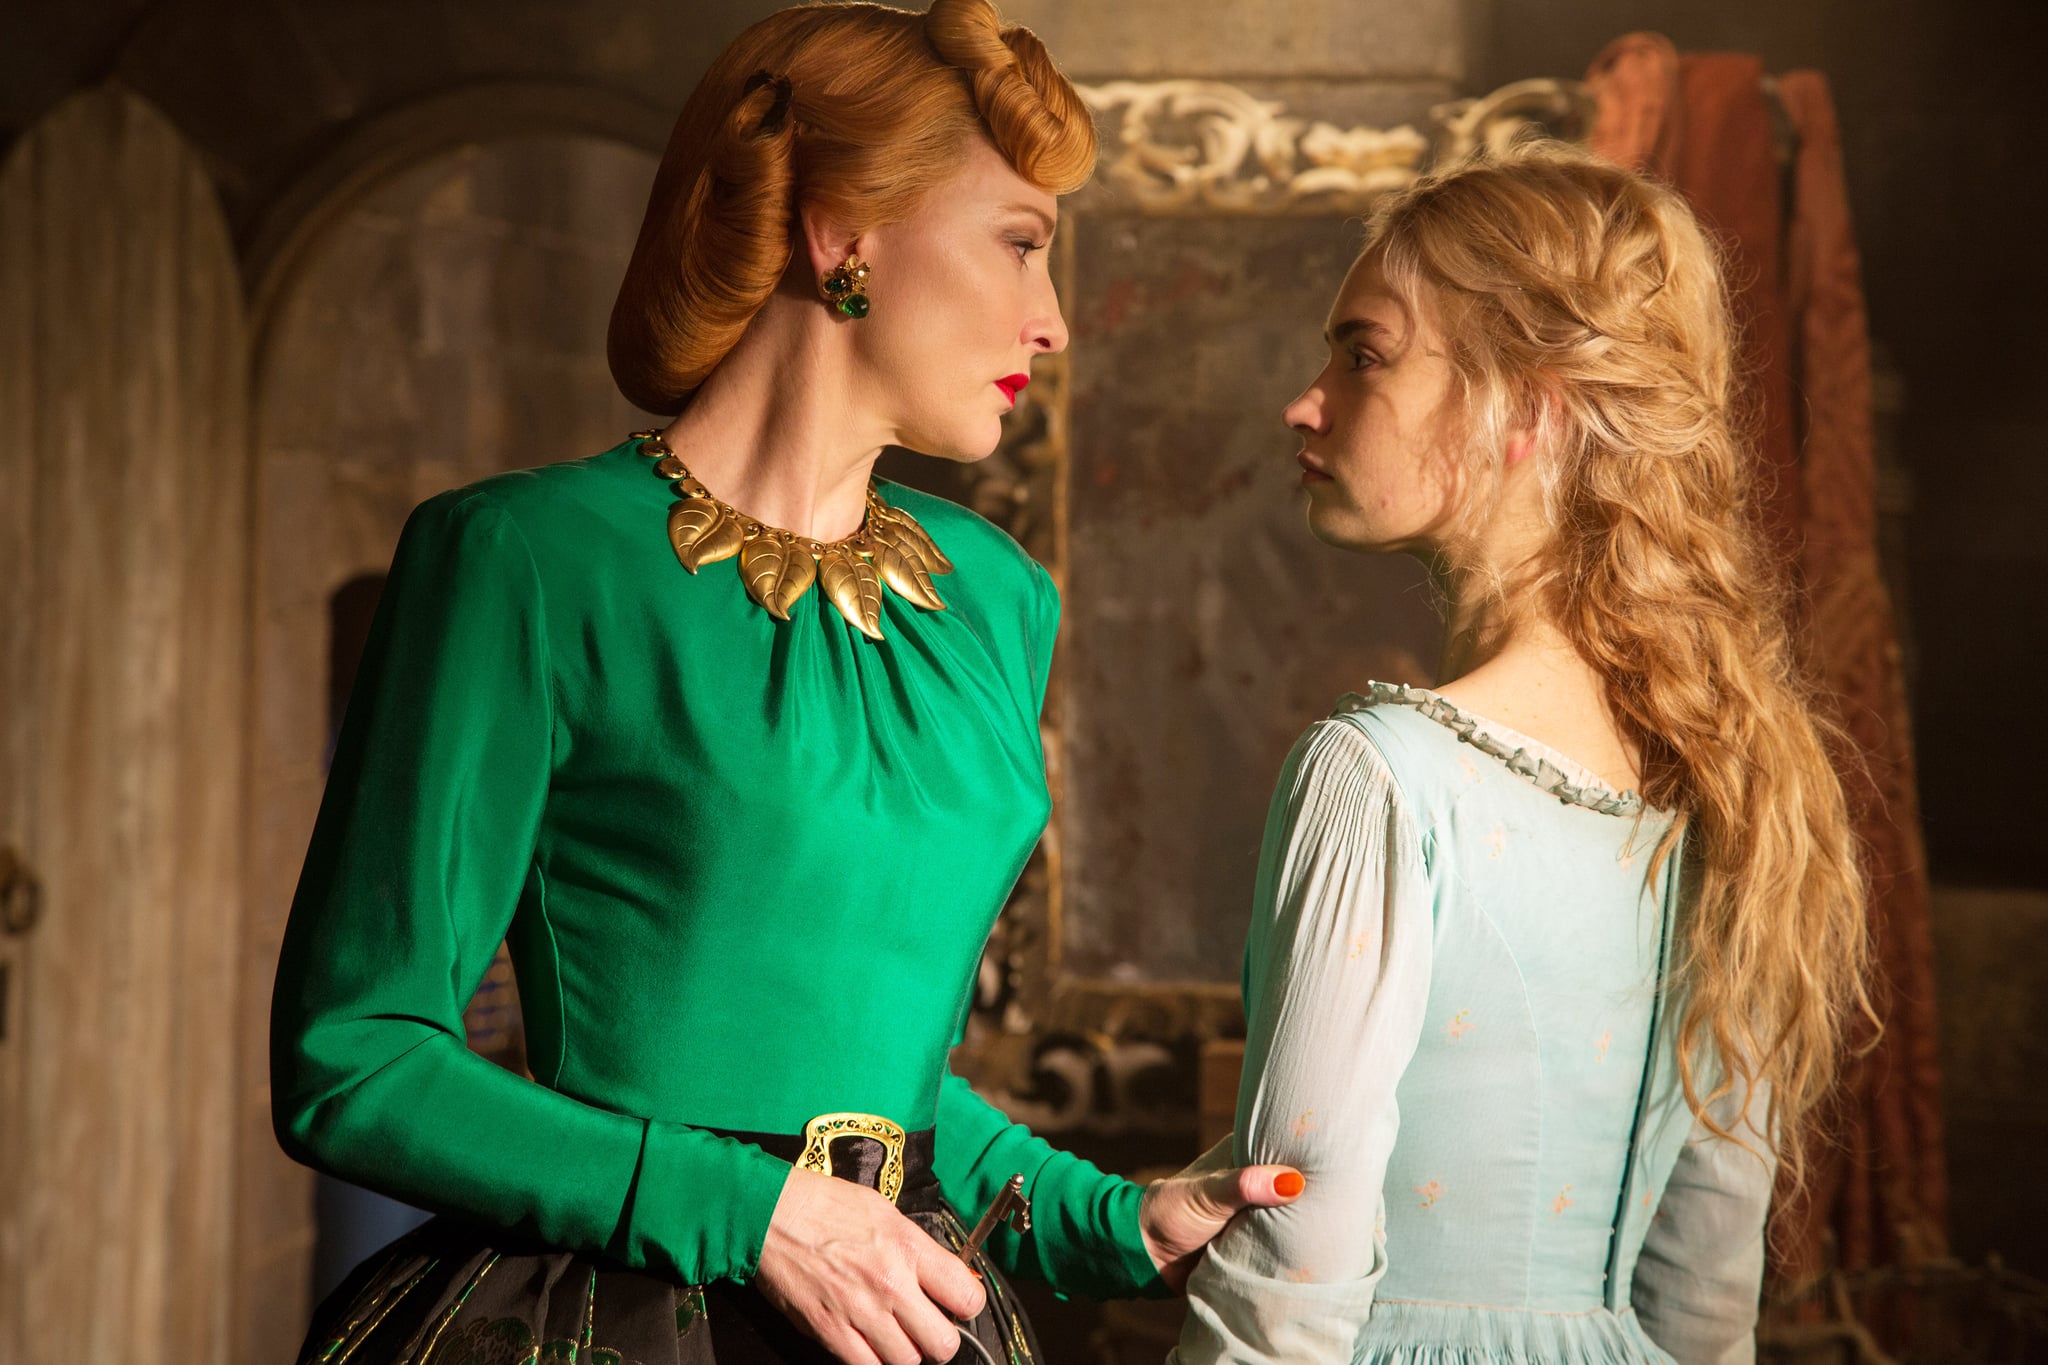 CINDERELLA, from left: Cate Blanchett, Lily James as Cinderella, 2015. ph: Jonathan Olley/Walt Disney Studios Motion Pictures/courtesy Everett Collection